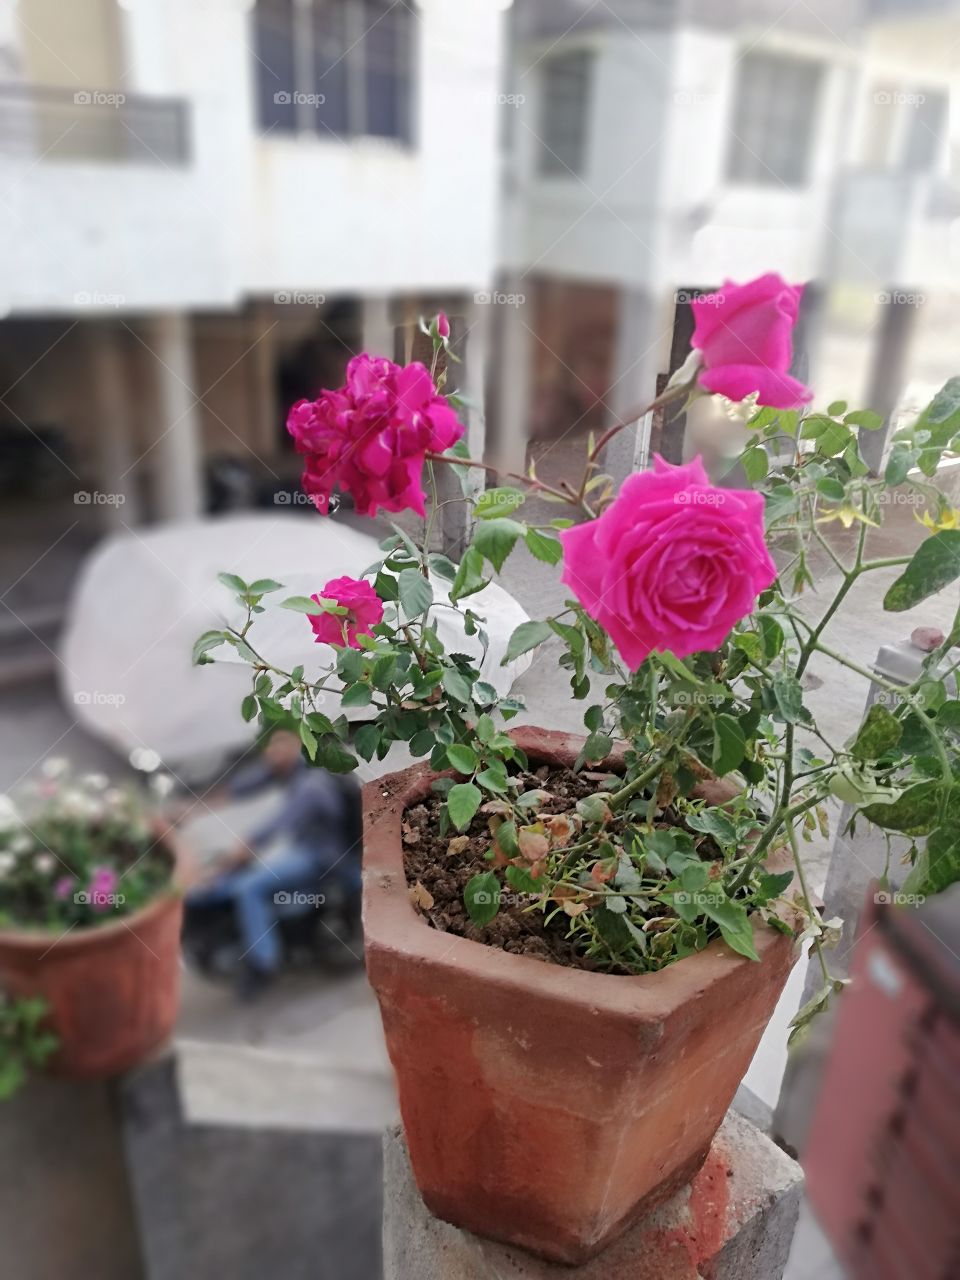 Awesome rose natural of beautiful smell and love natural beauty of romantic rose